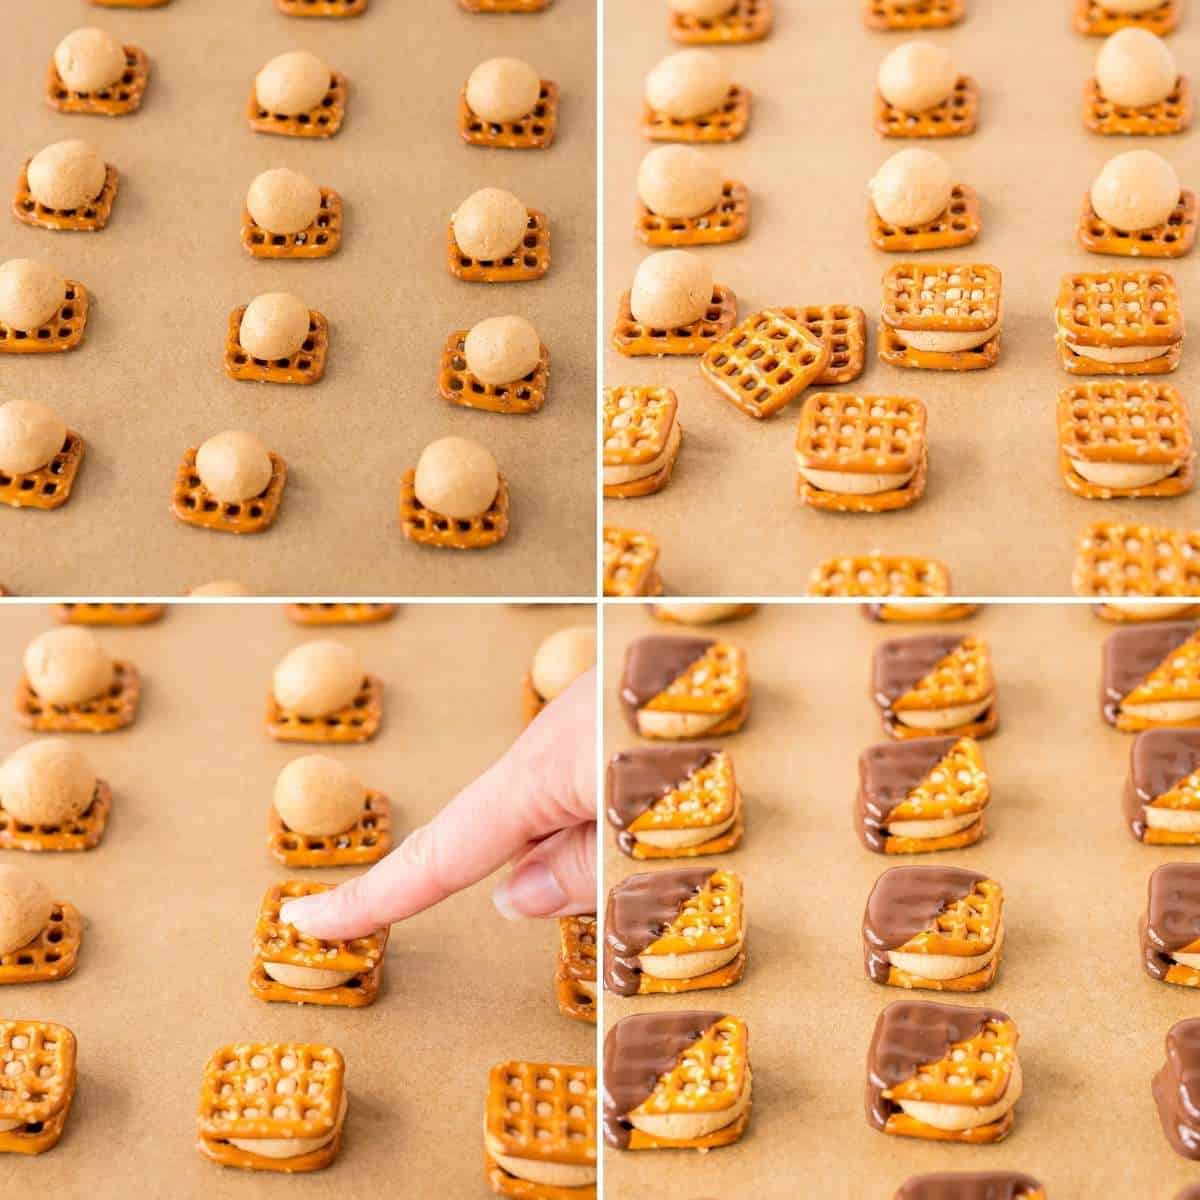 Collage of four images showing how to make peanut butter pretzel bites and dip in chocolate